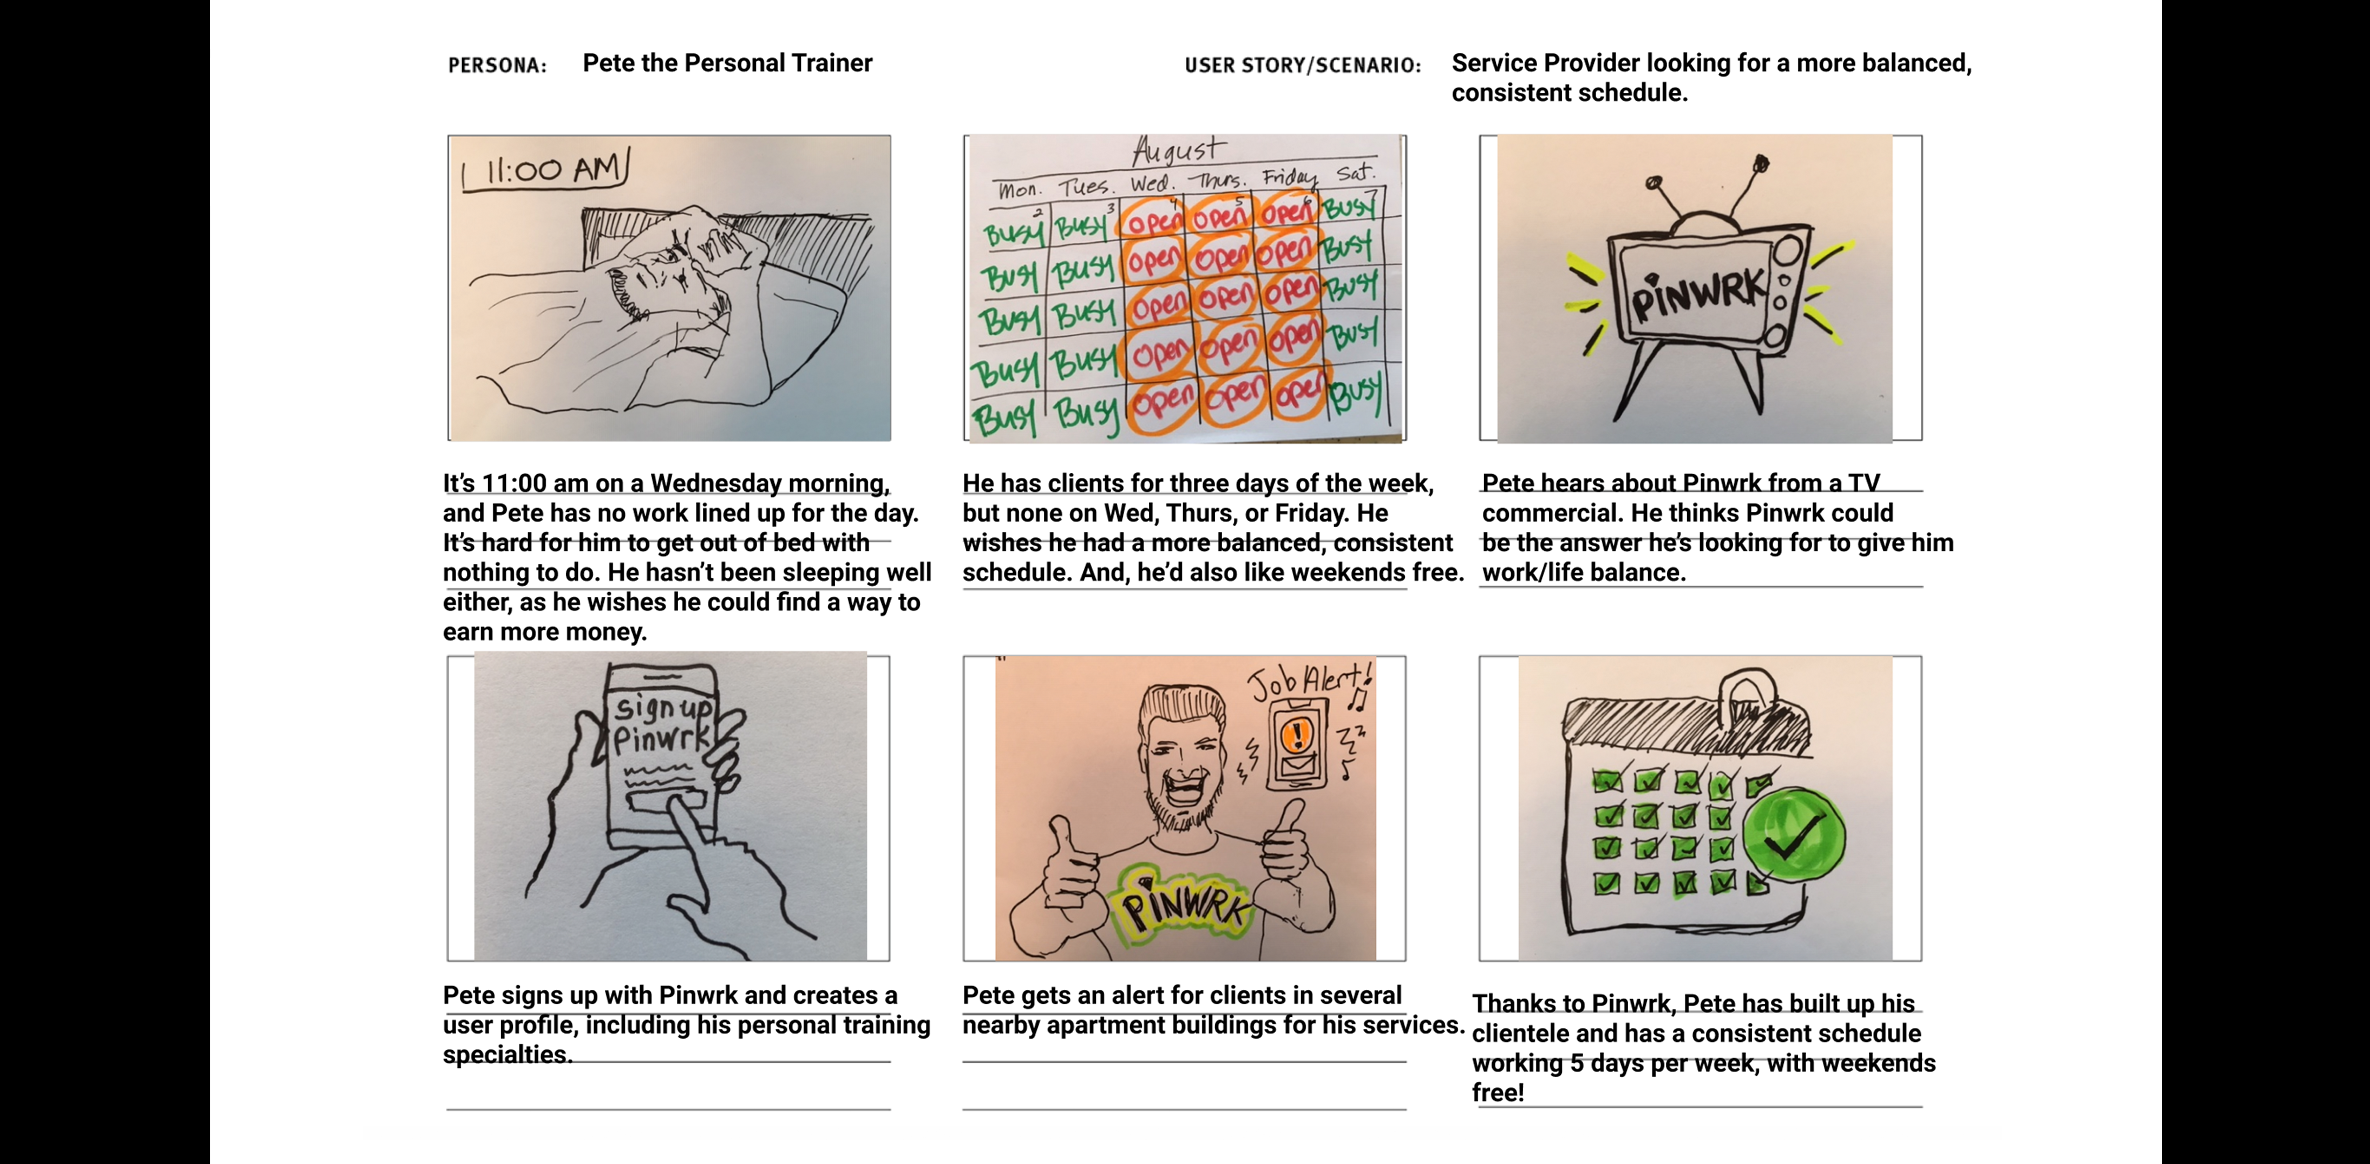 Storyboard of Pete the Personal Trainer looking to optimize his schedule.